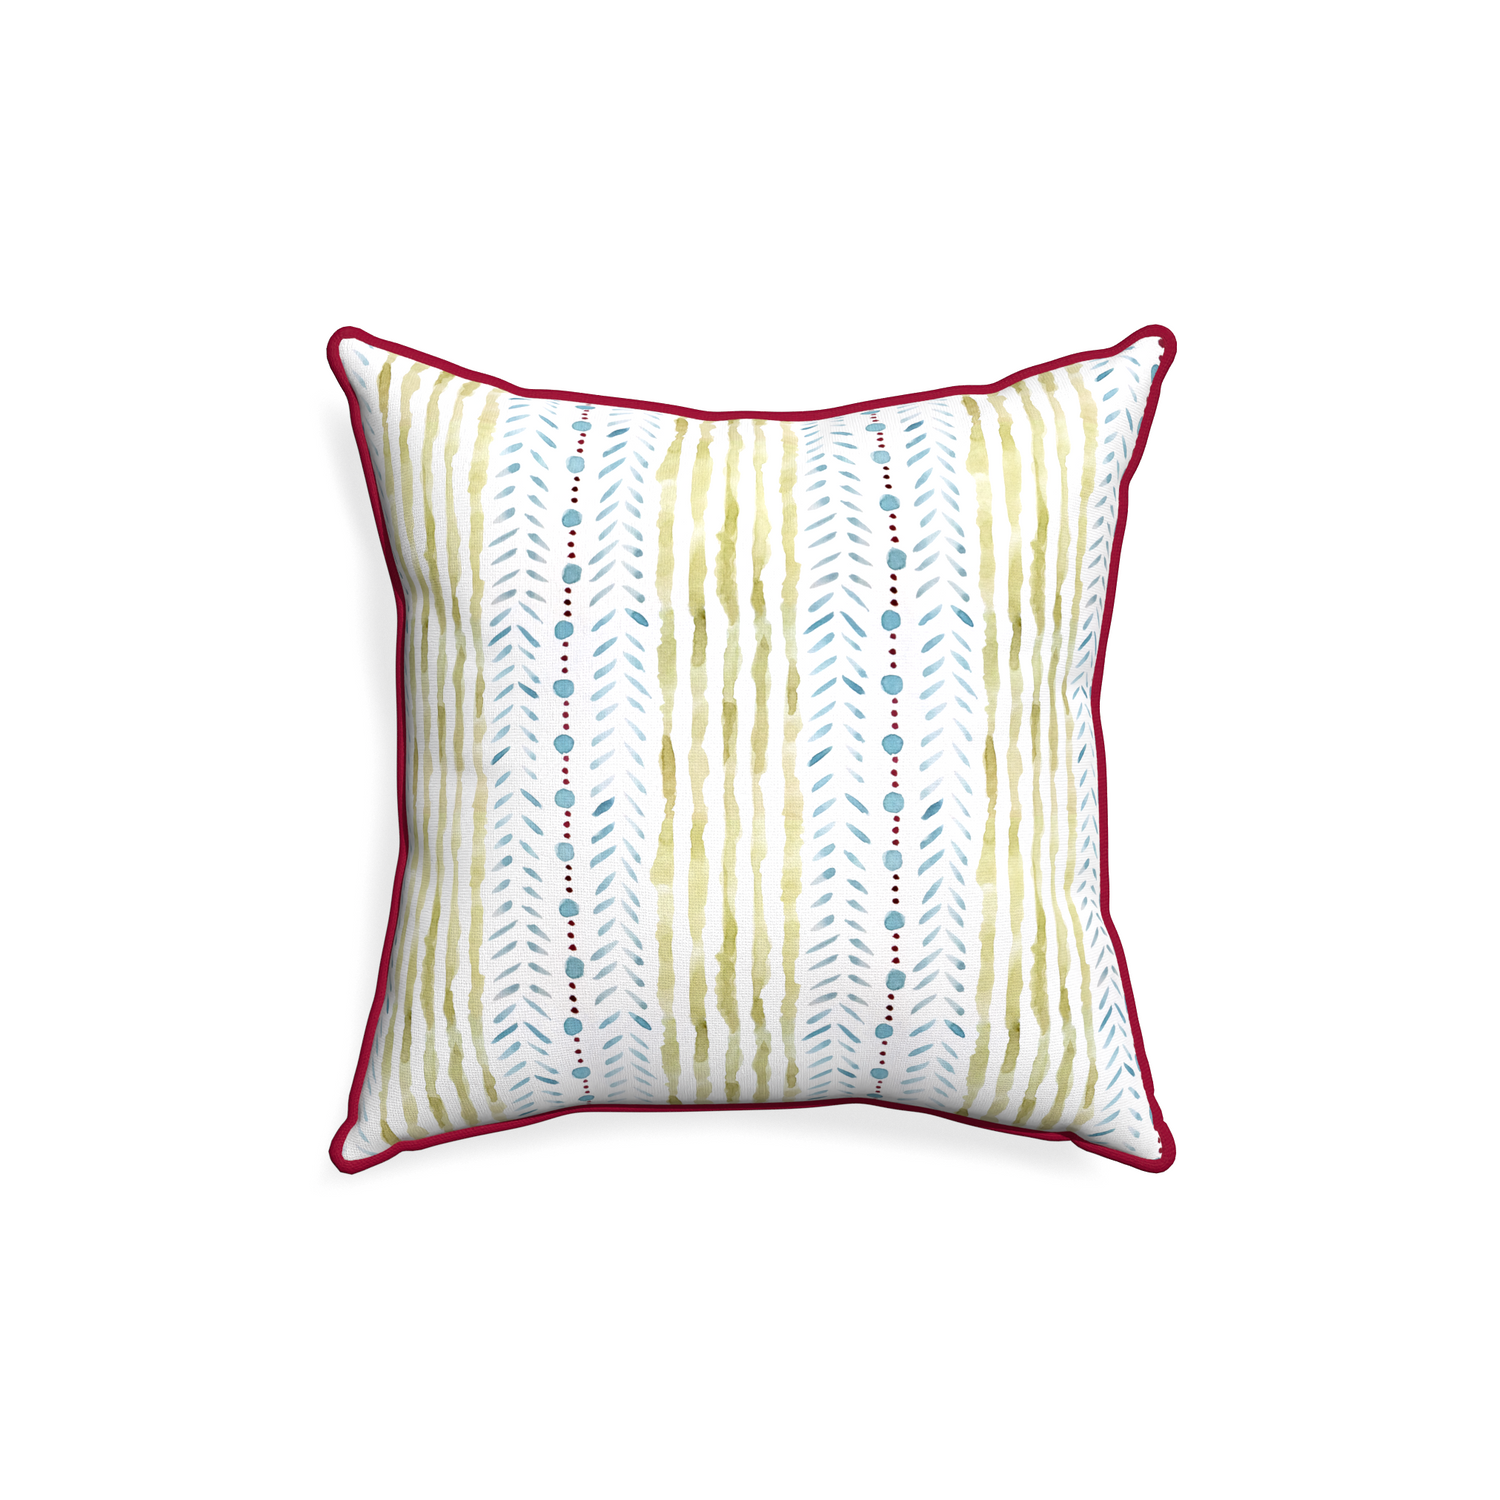 18-square julia custom blue & green stripedpillow with raspberry piping on white background